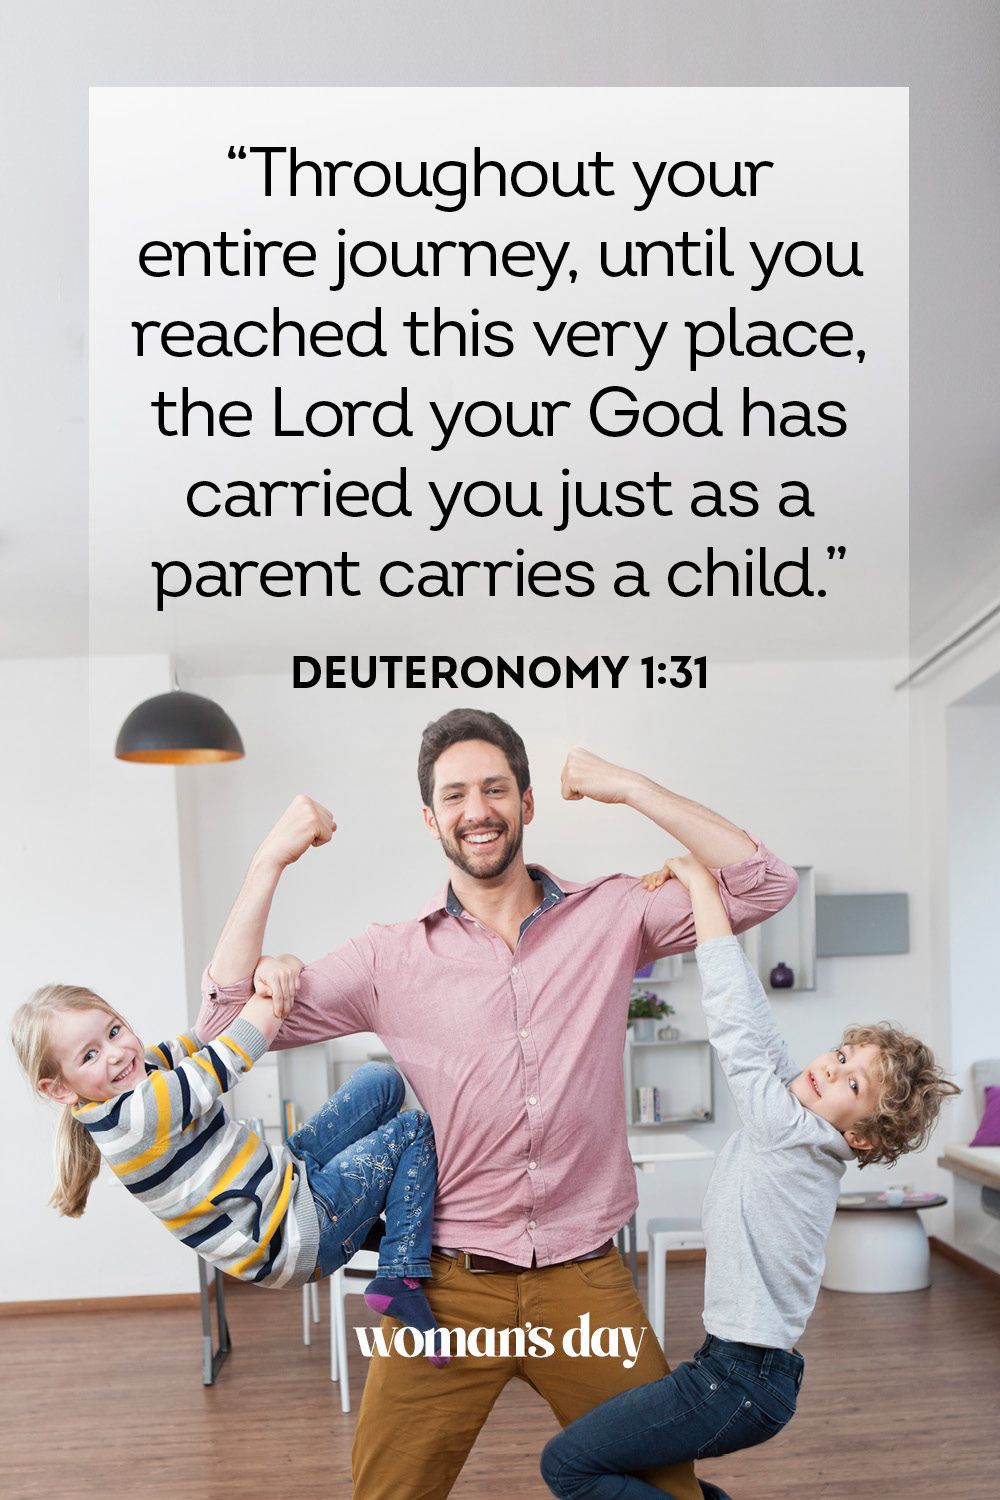 fathers day bible verse about being a good father